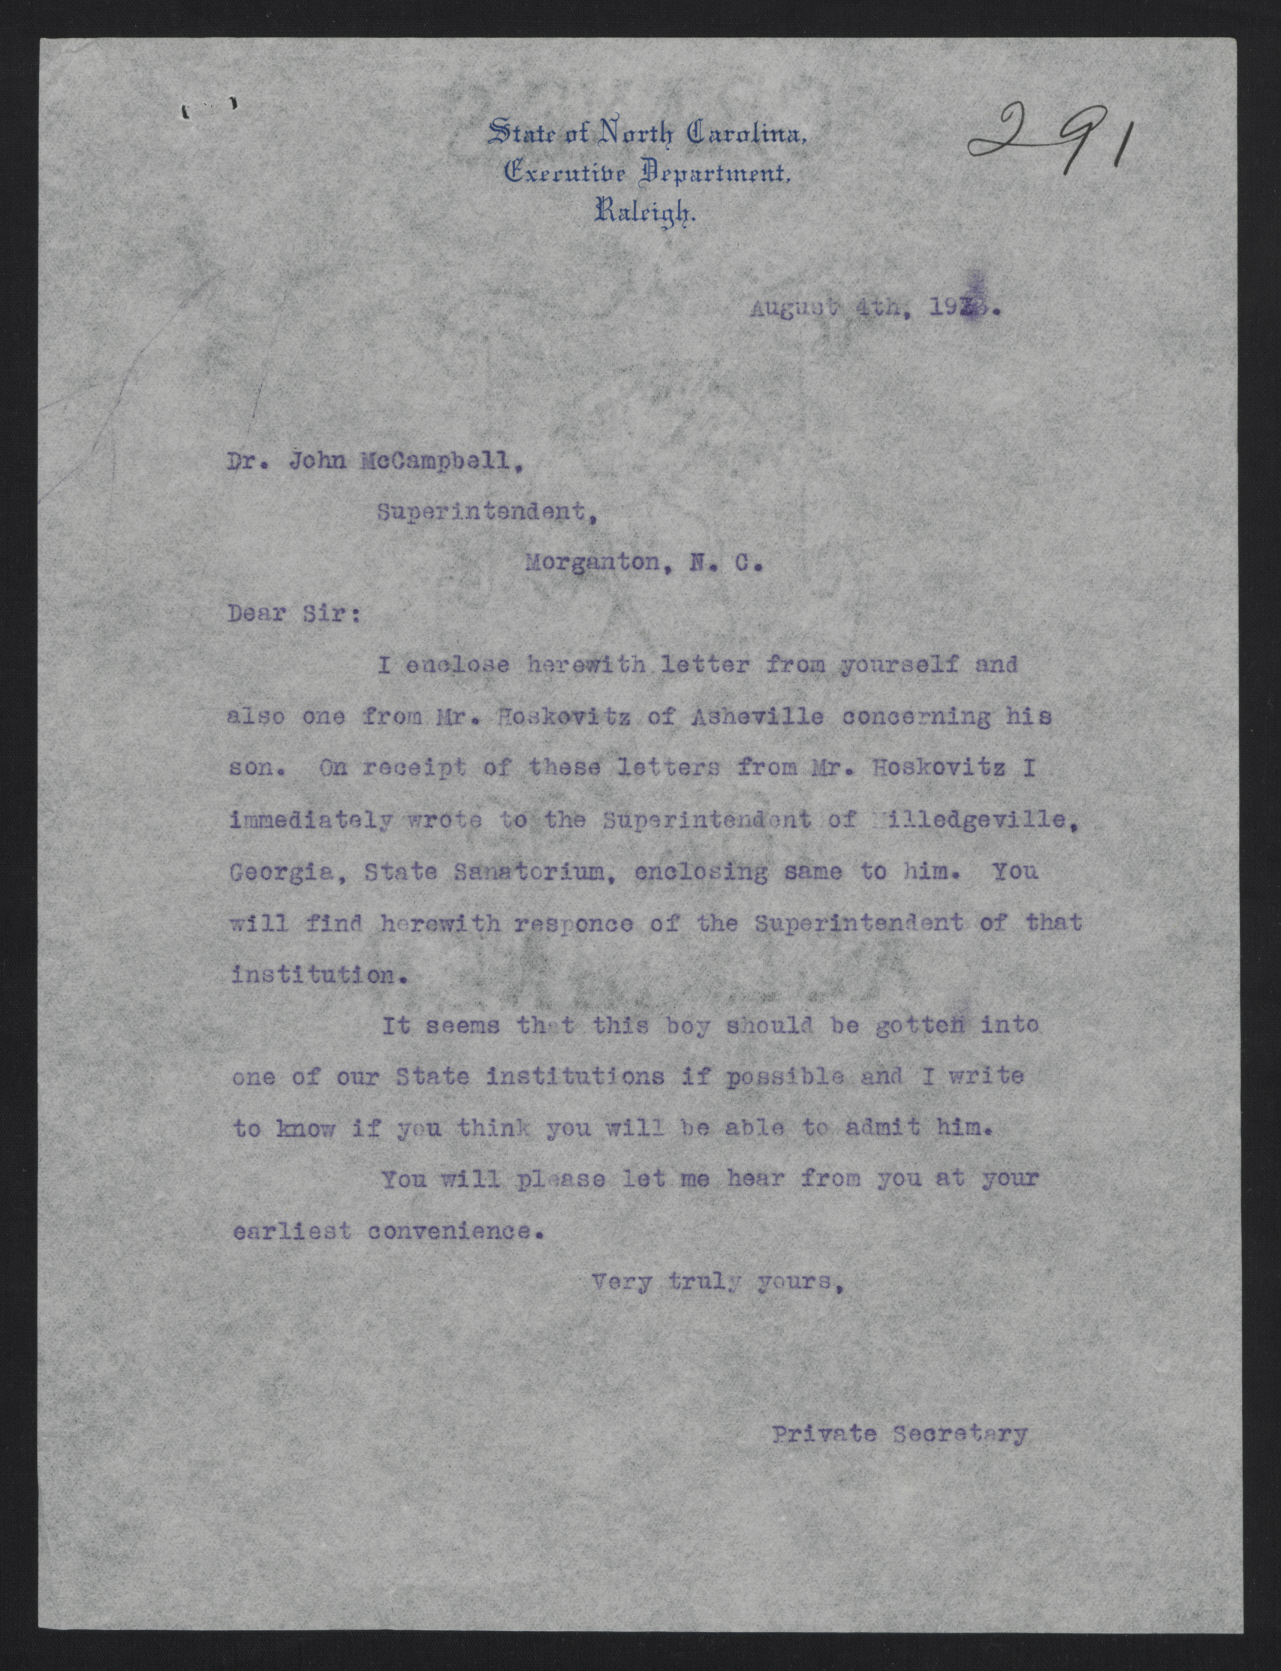 Letter from Kerr to McCampbell, August 4, 1913